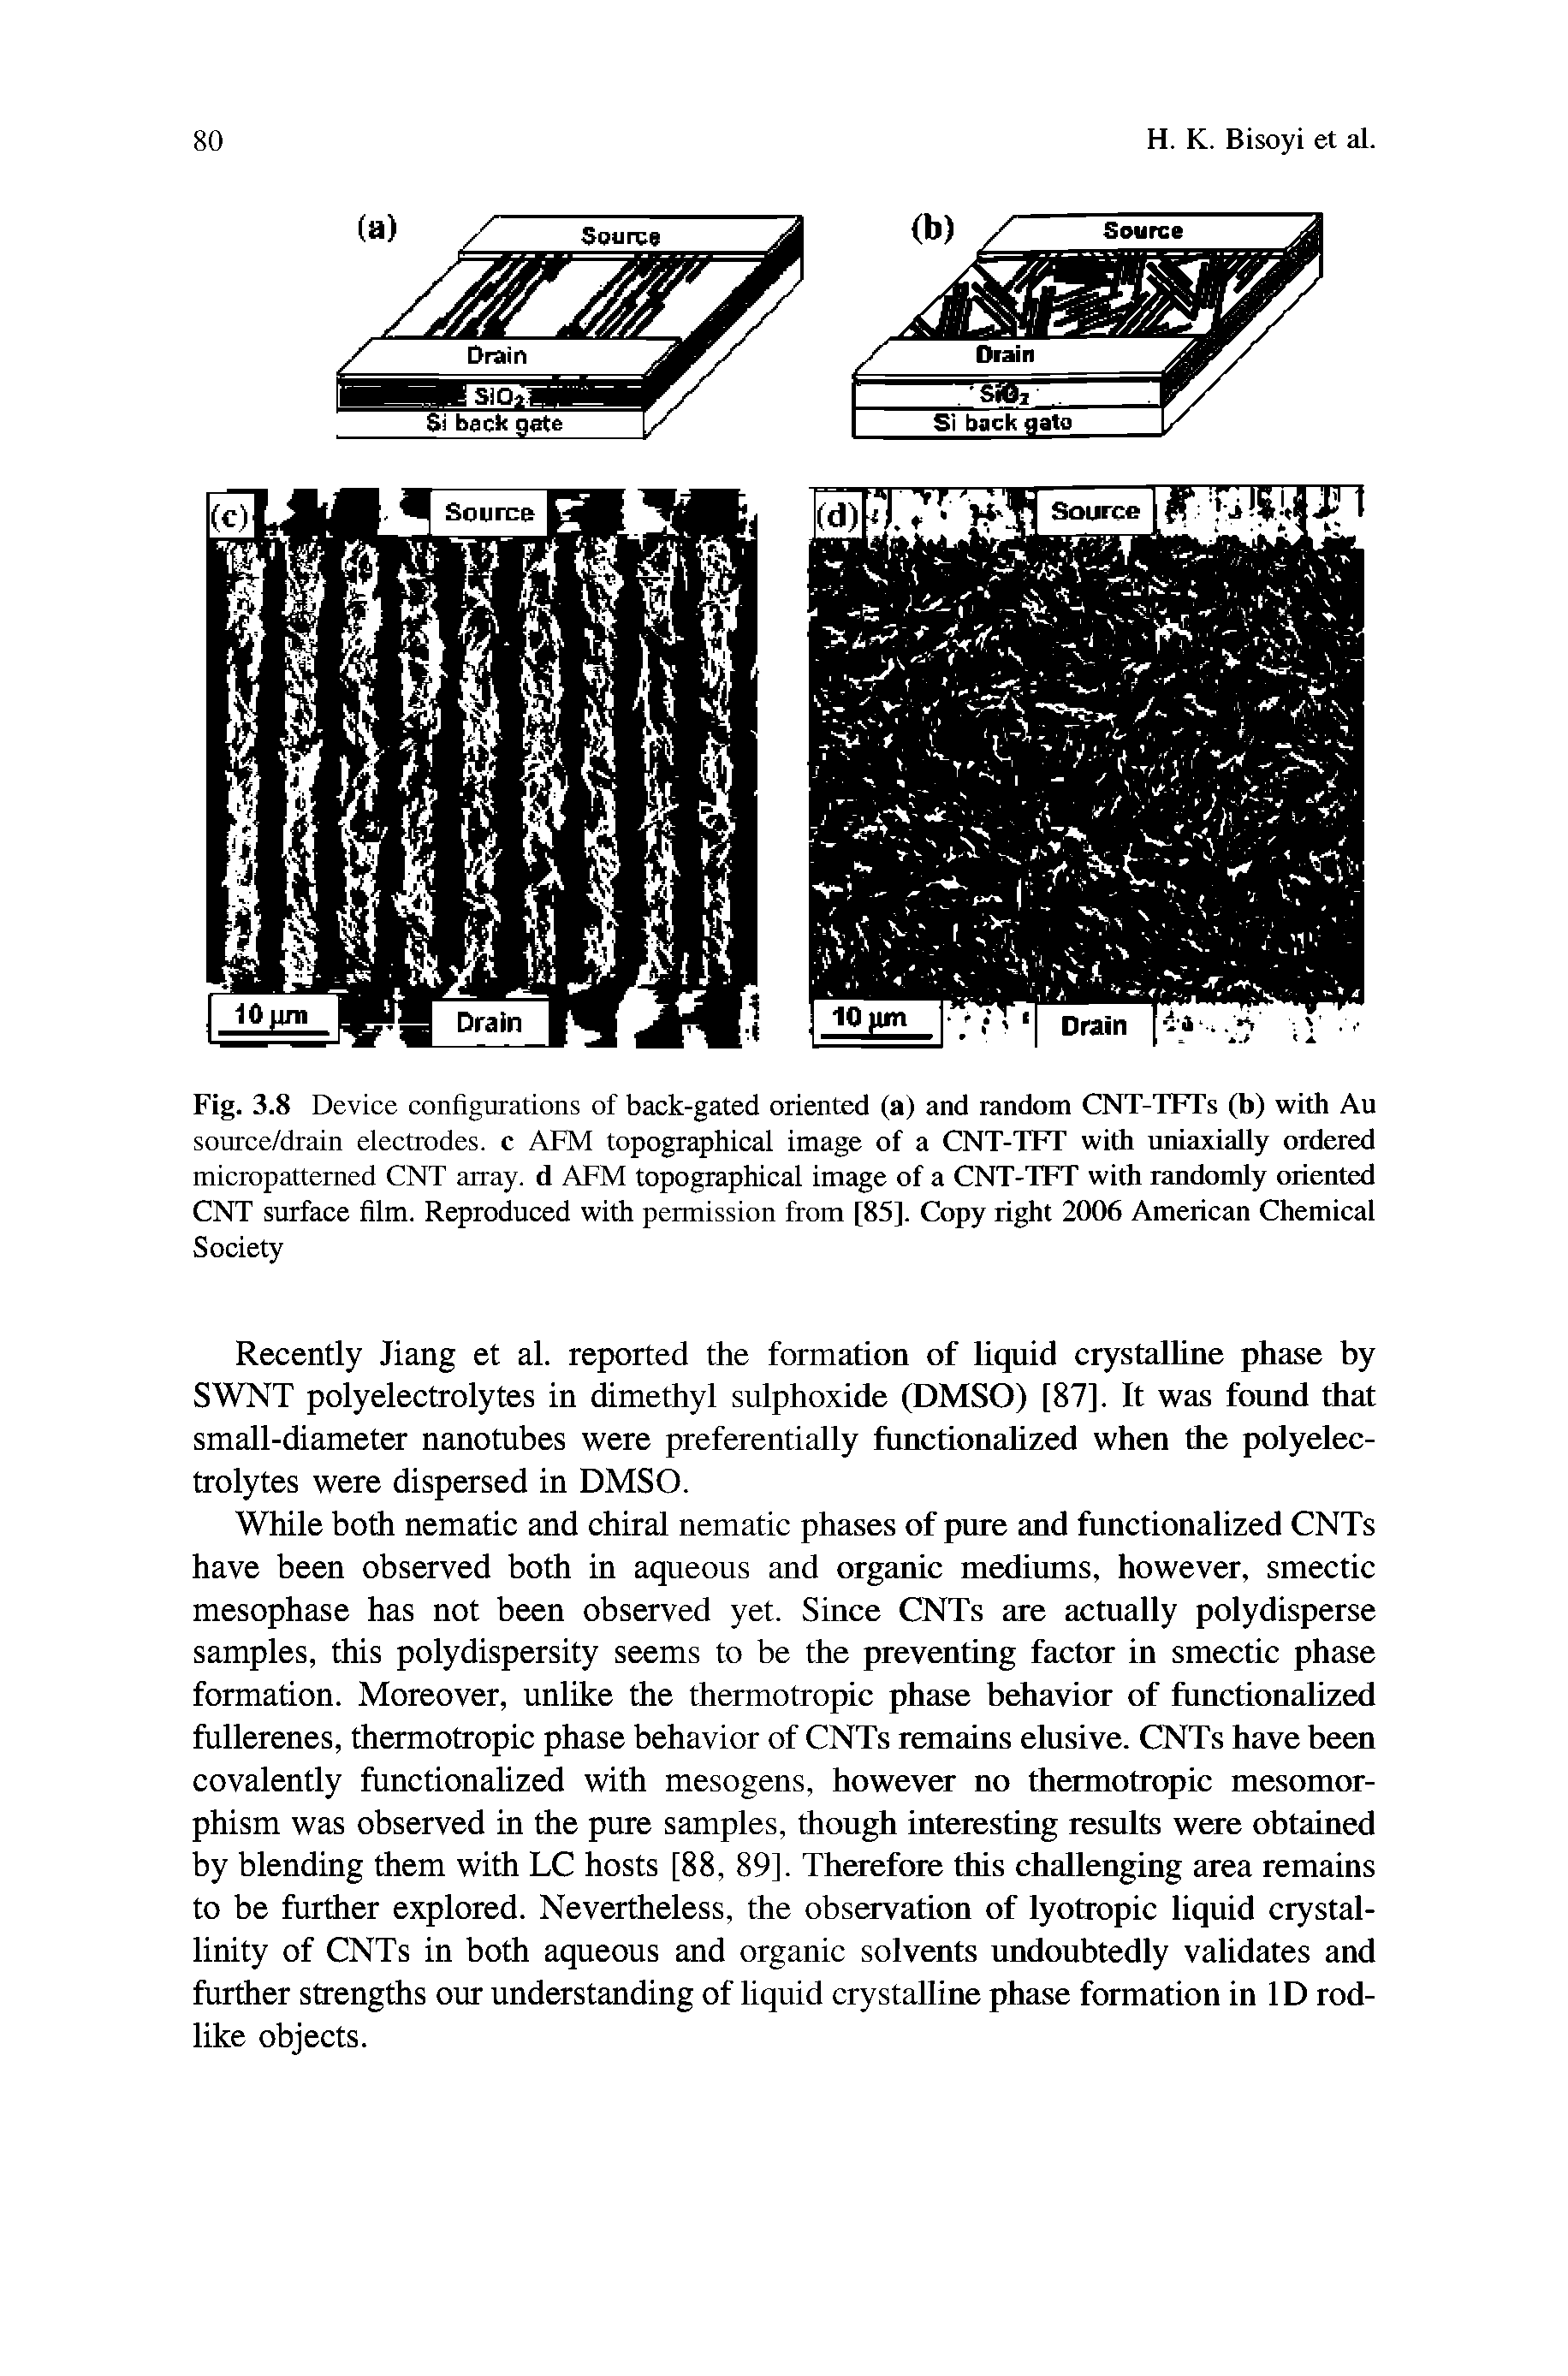 Fig. 3.8 Device configurations of back-gated oriented (a) and random CNT-TFTs (b) with Au source/drain electrodes, c AFM topographical image of a CNT-TFT with uniaxially ordered micropatterned CNT array, d AFM topographical image of a CNT-TFT with randomly oriented CNT surface film. Reproduced with permission from [85]. Copy right 2006 American Chemical Society...